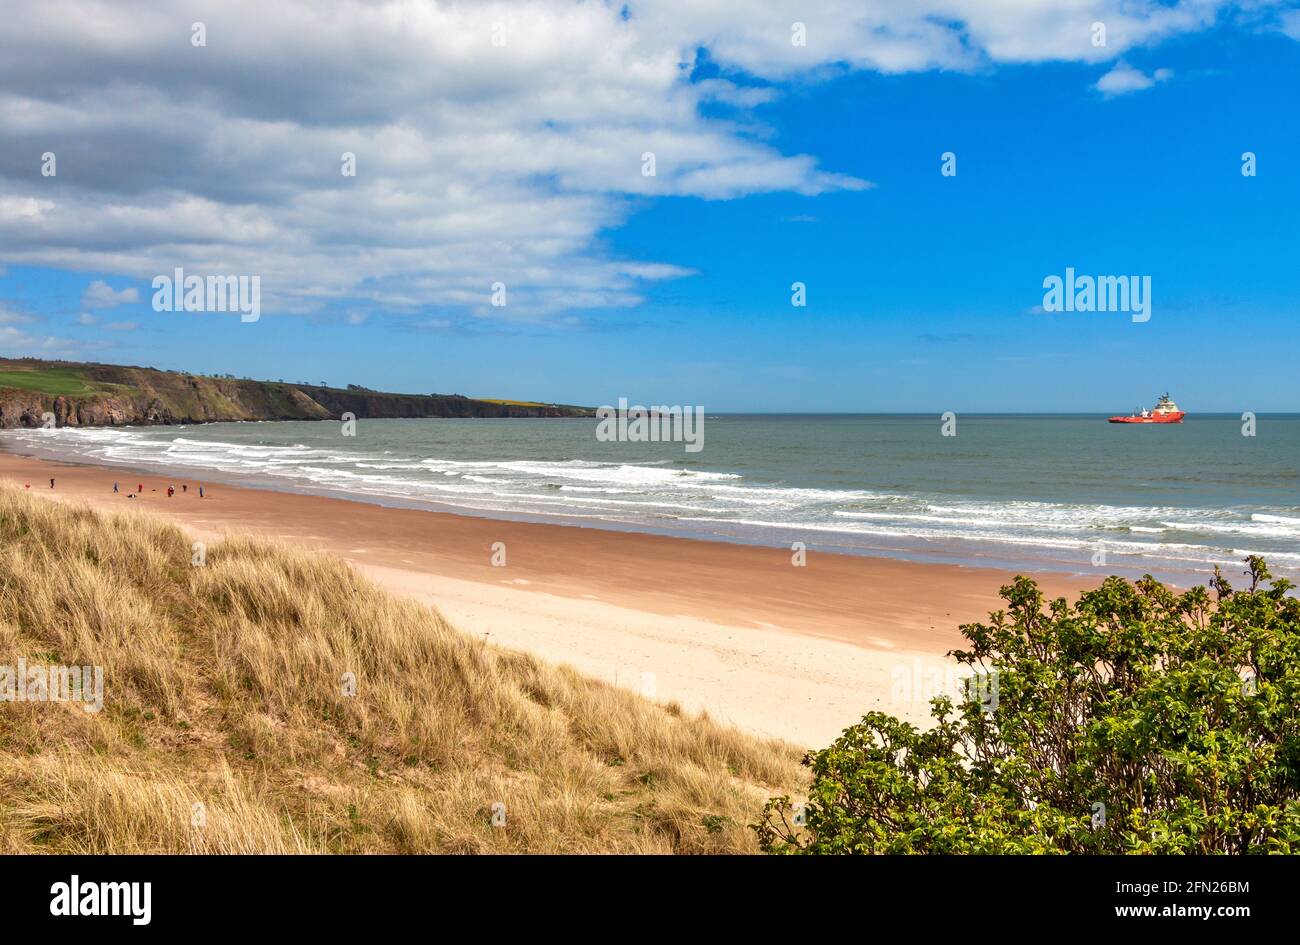 LUNAN BAY AND BEACH ANGUS SCOTLAND LOOKING SOUTH SANDY BEACH WITH PEOPLE AND SEA WITH OIL RIG SUPPORT VESSEL Stock Photo